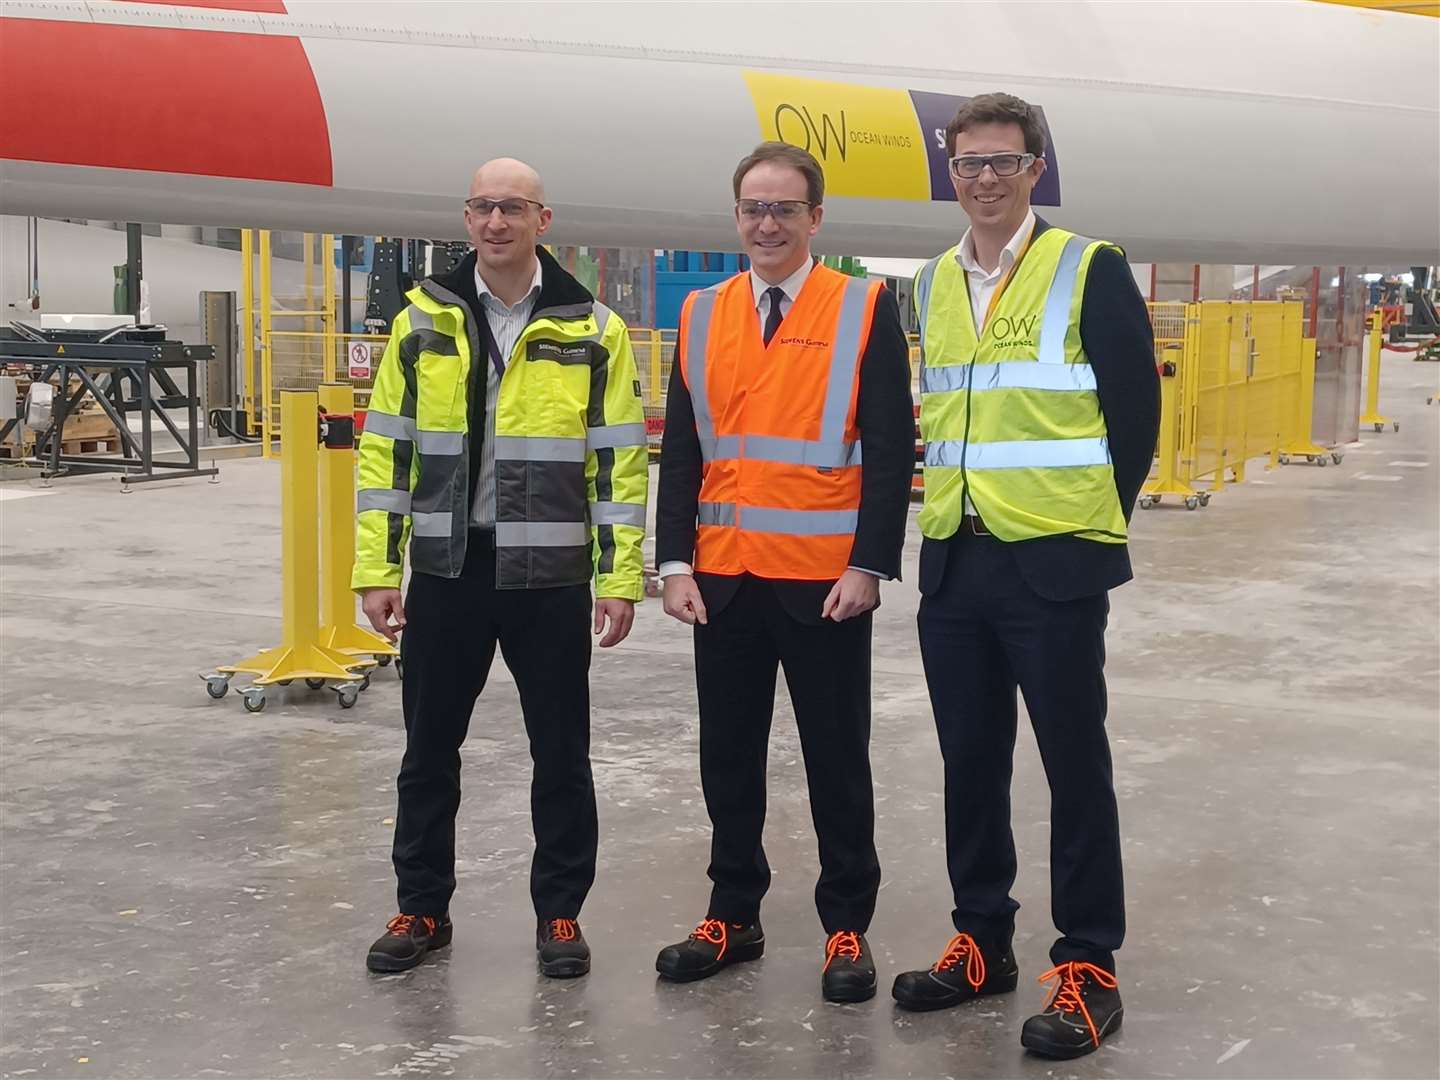 (From left) Andy Sykes (Plant Director, Siemens Gamesa), Gareth Davies MP, (Exchequer Secretary to the Treasury) and Adam Morrison (Ocean Winds UK Country Manager).